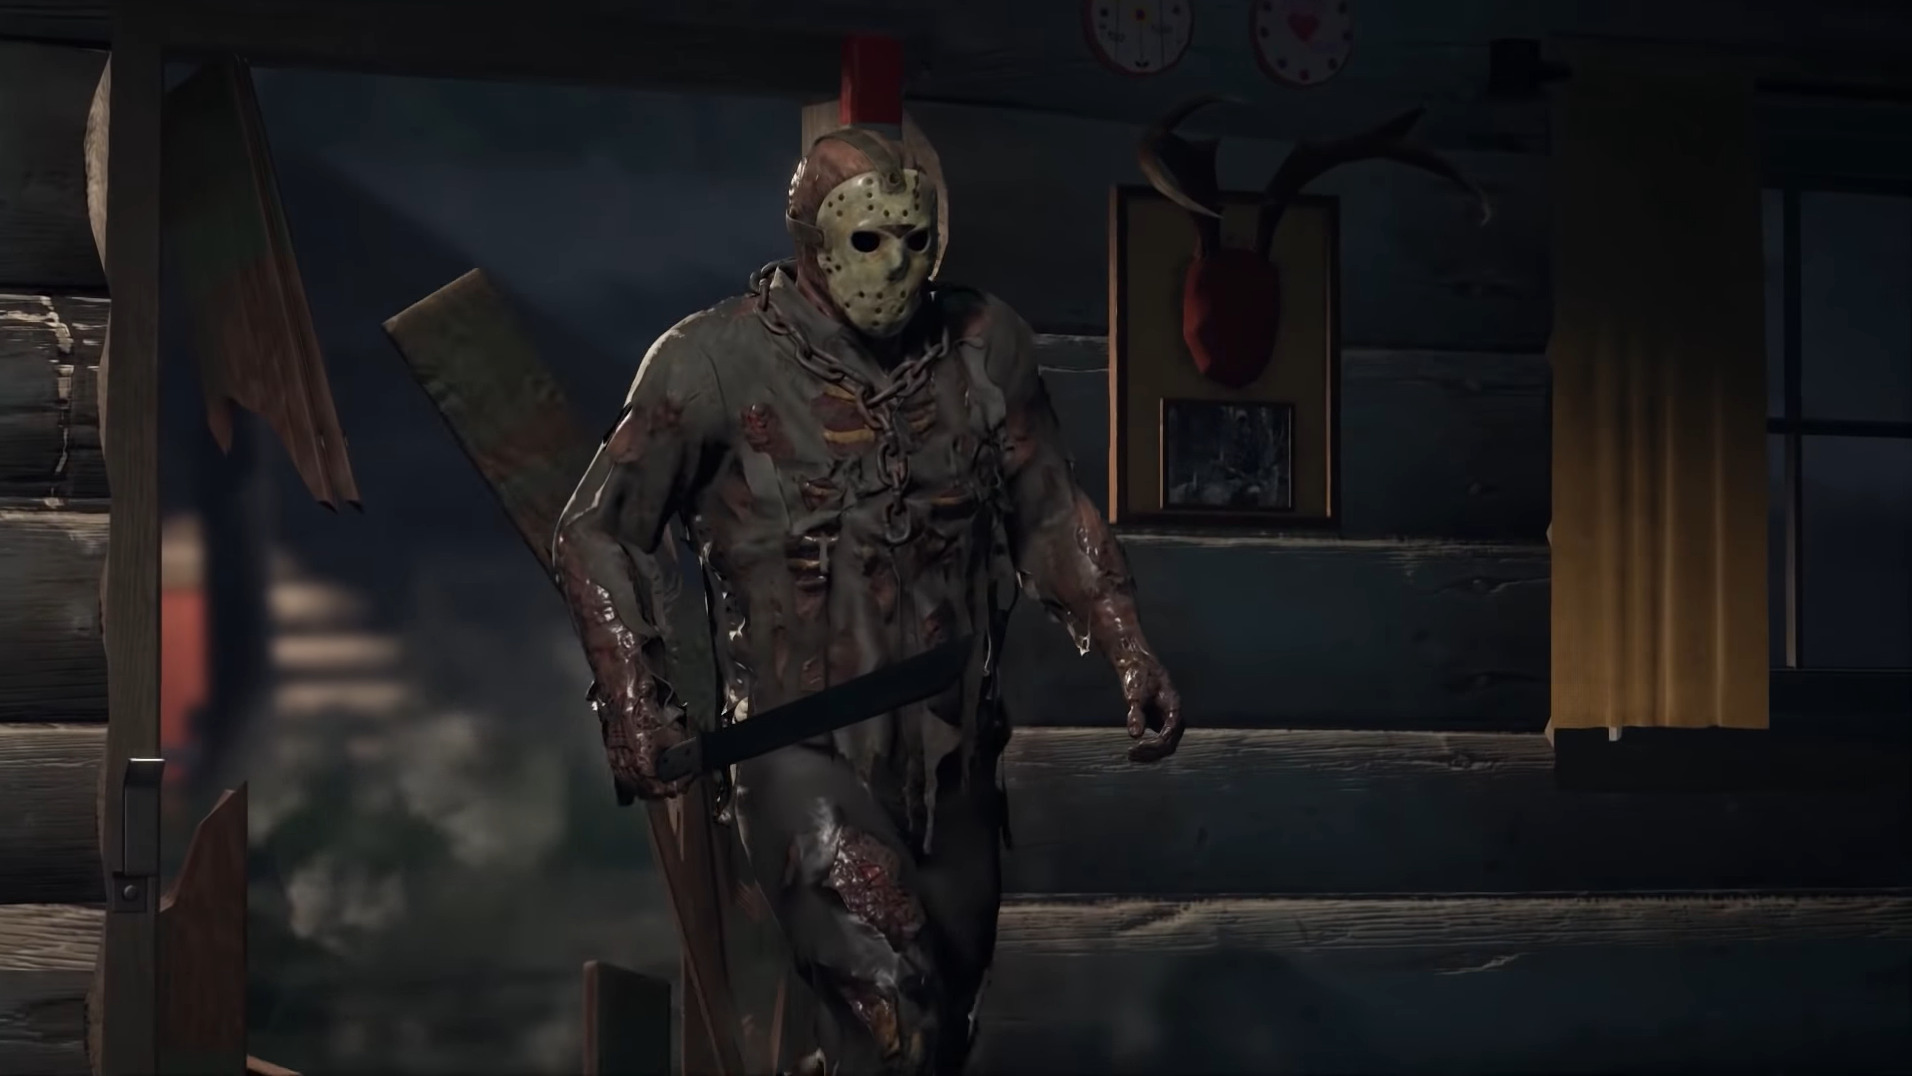 Friday The 13th: The Franchise: Friday The 13th: The Game